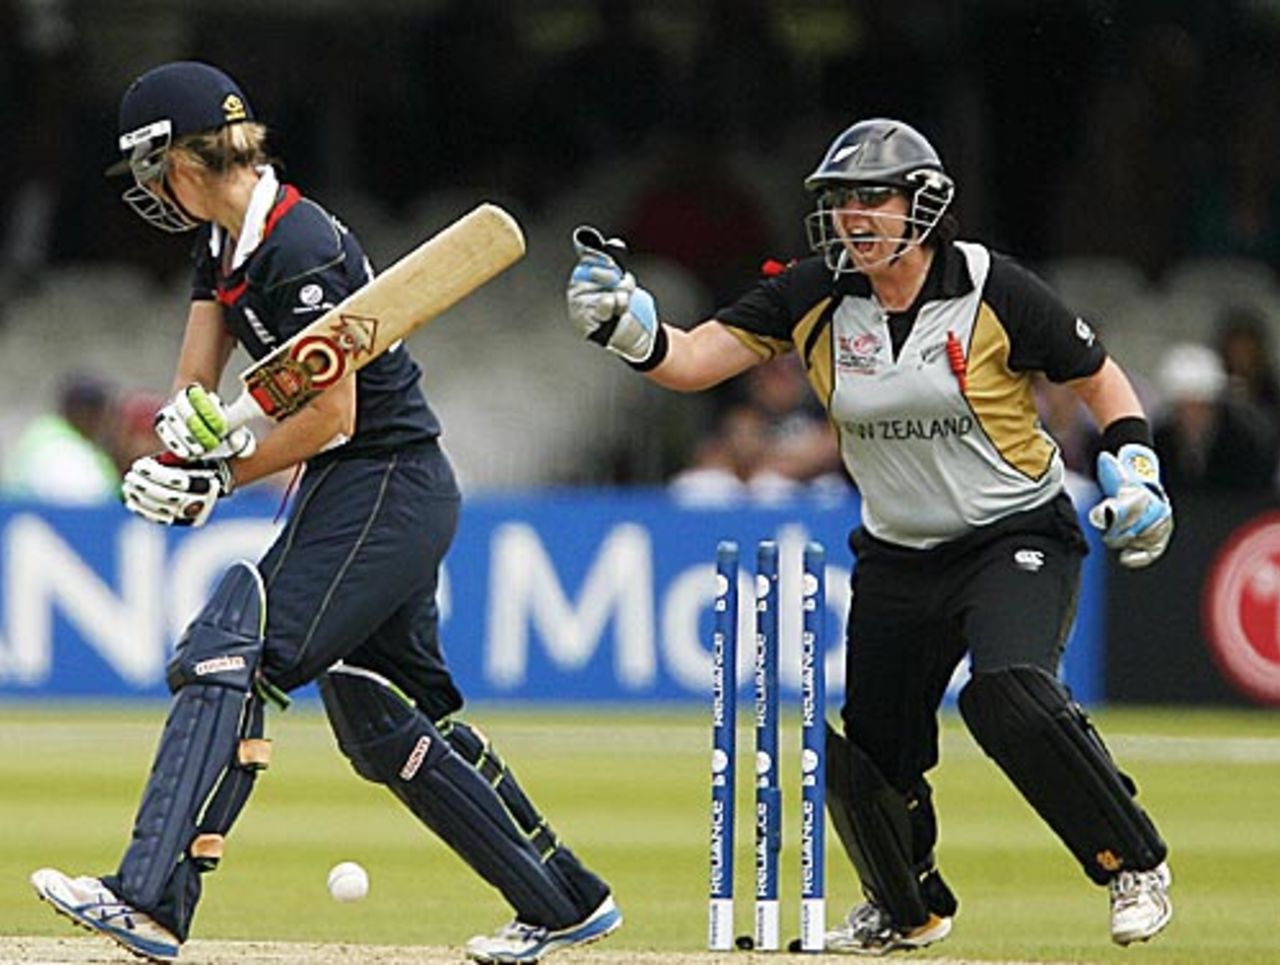 Charlotte Edwards was bowled for 9, England v New Zealand, ICC Women's World Twenty20 final, Lord's, June 21, 2009